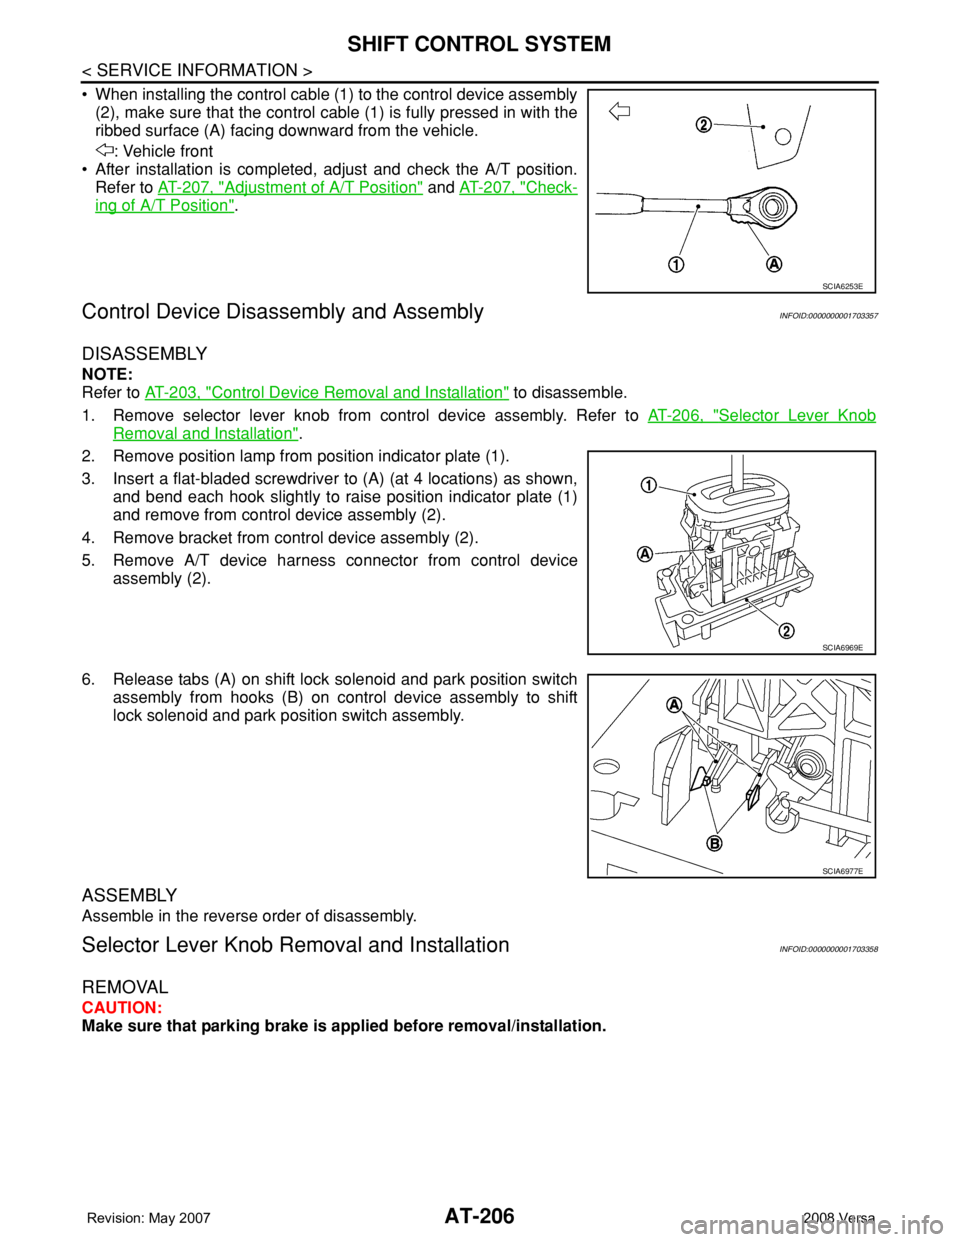 NISSAN LATIO 2008  Service Repair Manual AT-206
< SERVICE INFORMATION >
SHIFT CONTROL SYSTEM
• When installing the control cable (1) to the control device assembly
(2), make sure that the control cable (1) is fully pressed in with the
ribb